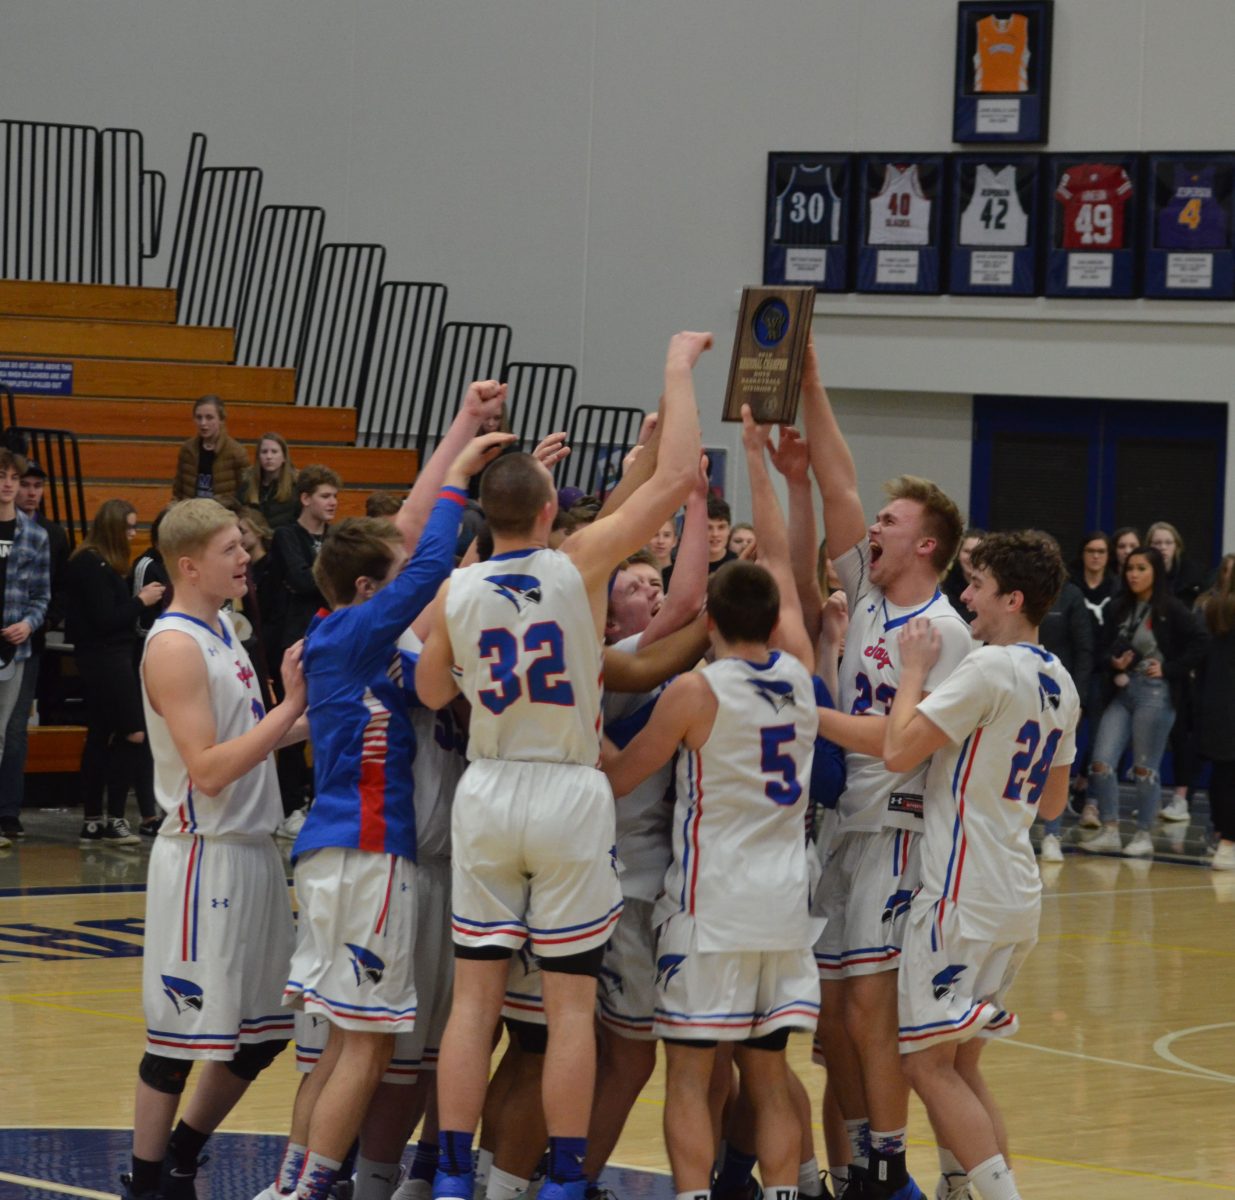 Bluejays advance to sectionals